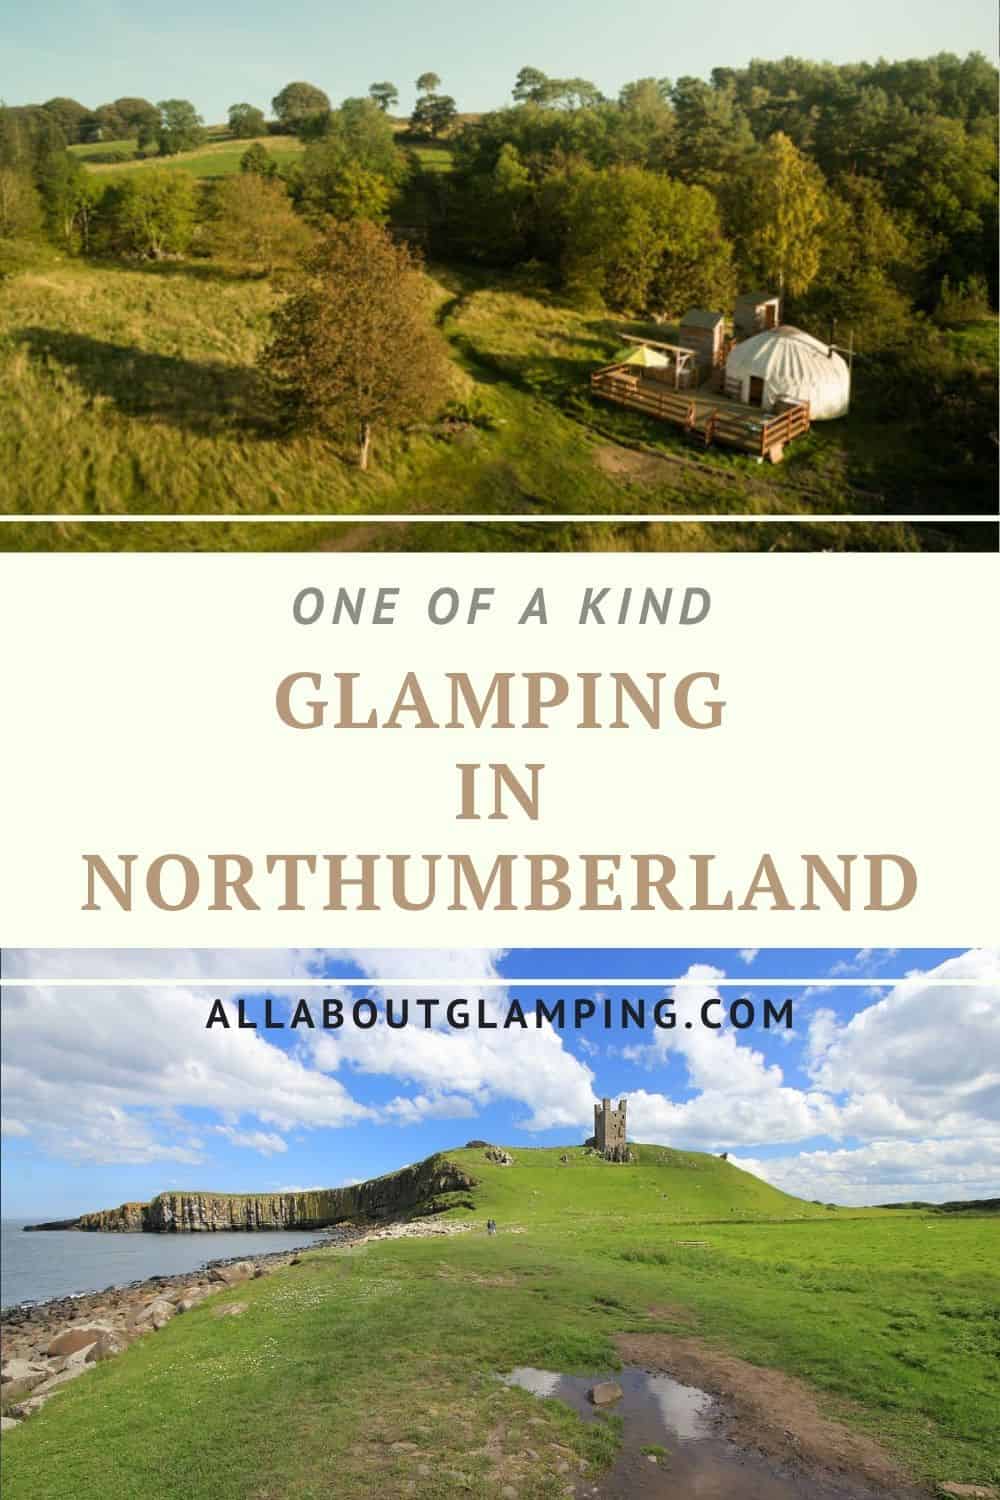 All About Glamping Ireland 3